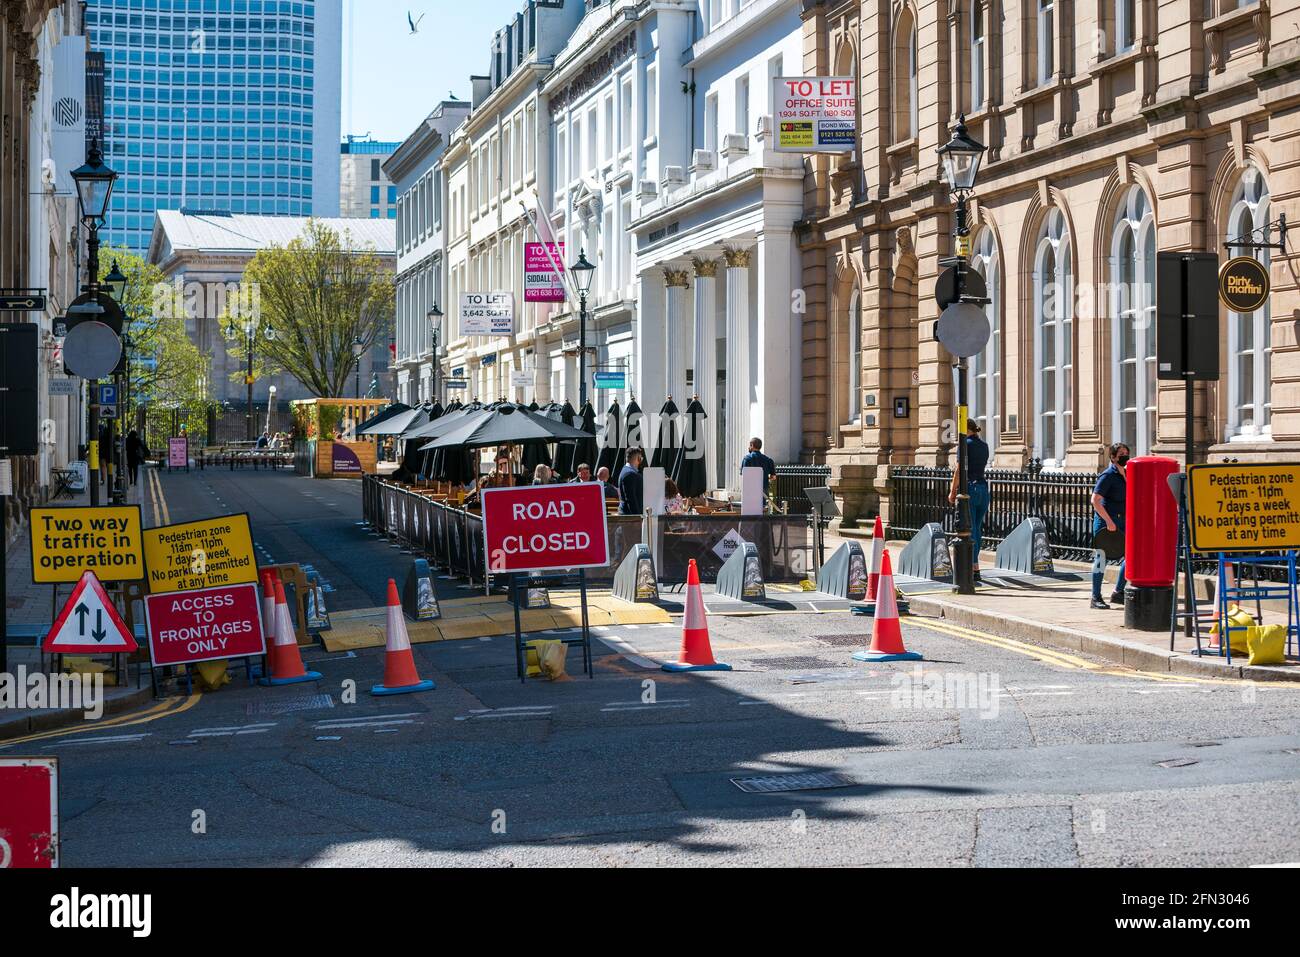 Road closed for COVID-19 social distancing and outdoor dining in Colmore Row, Birmingham city centre, UK Stock Photo